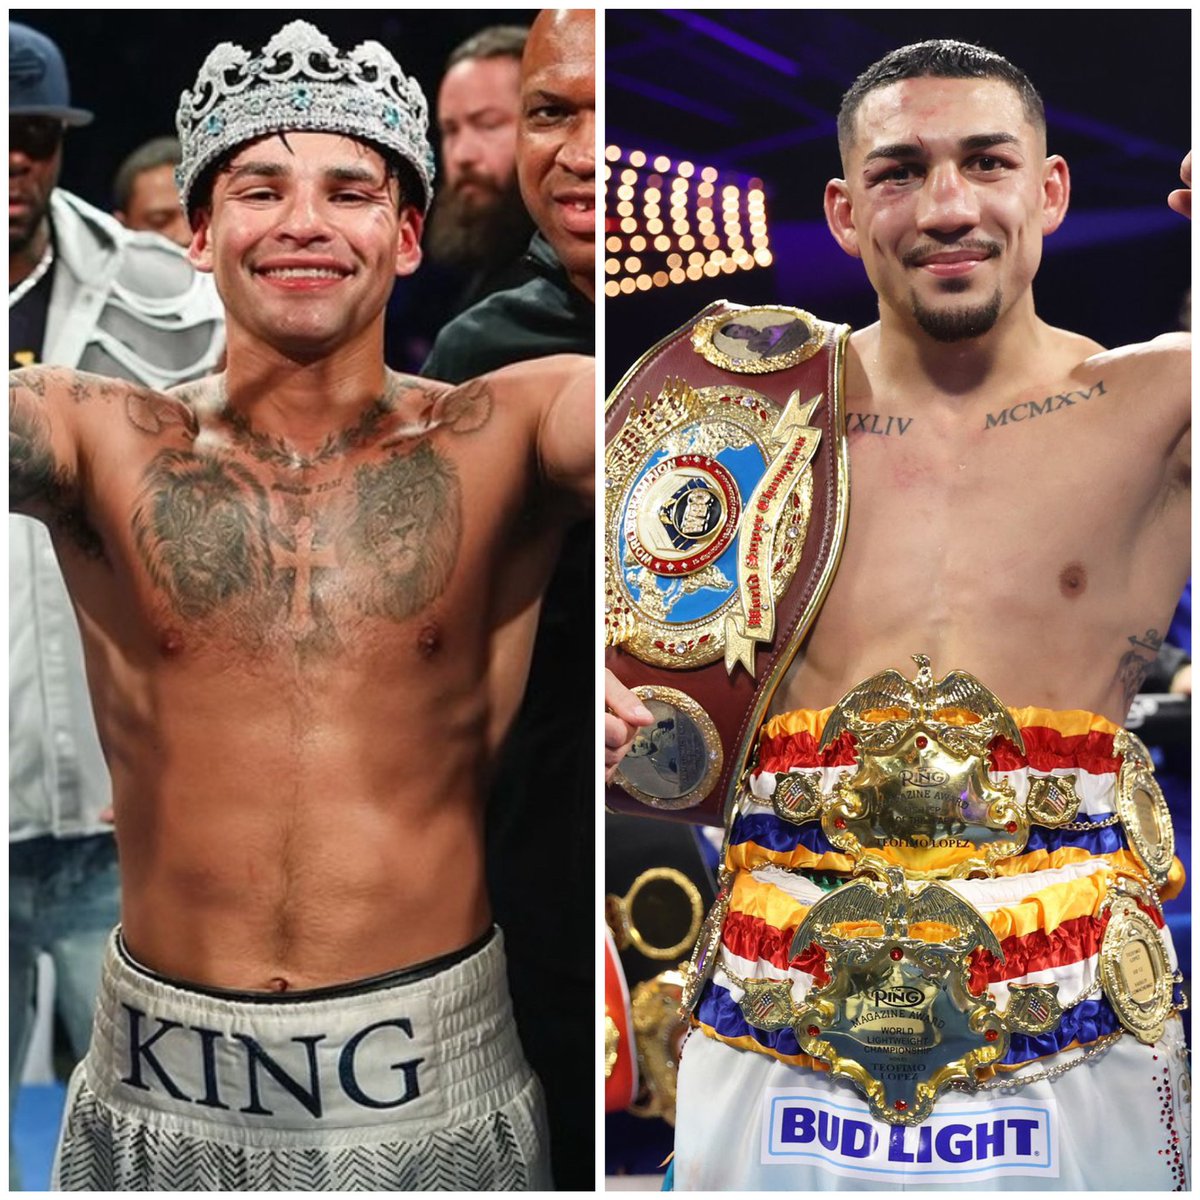 This fight is so much Bigger Now if Ryan Garcia can make 140 lbs then WBO Junior Welterweight Champion Teofimo Lopez is the Biggest fight to make. Let’s Hope Oscar and Bob Arum can deliver this for the fans. #lopezgarcia #garcialopez #goldenboypromotions #toprankboxing #DAZN